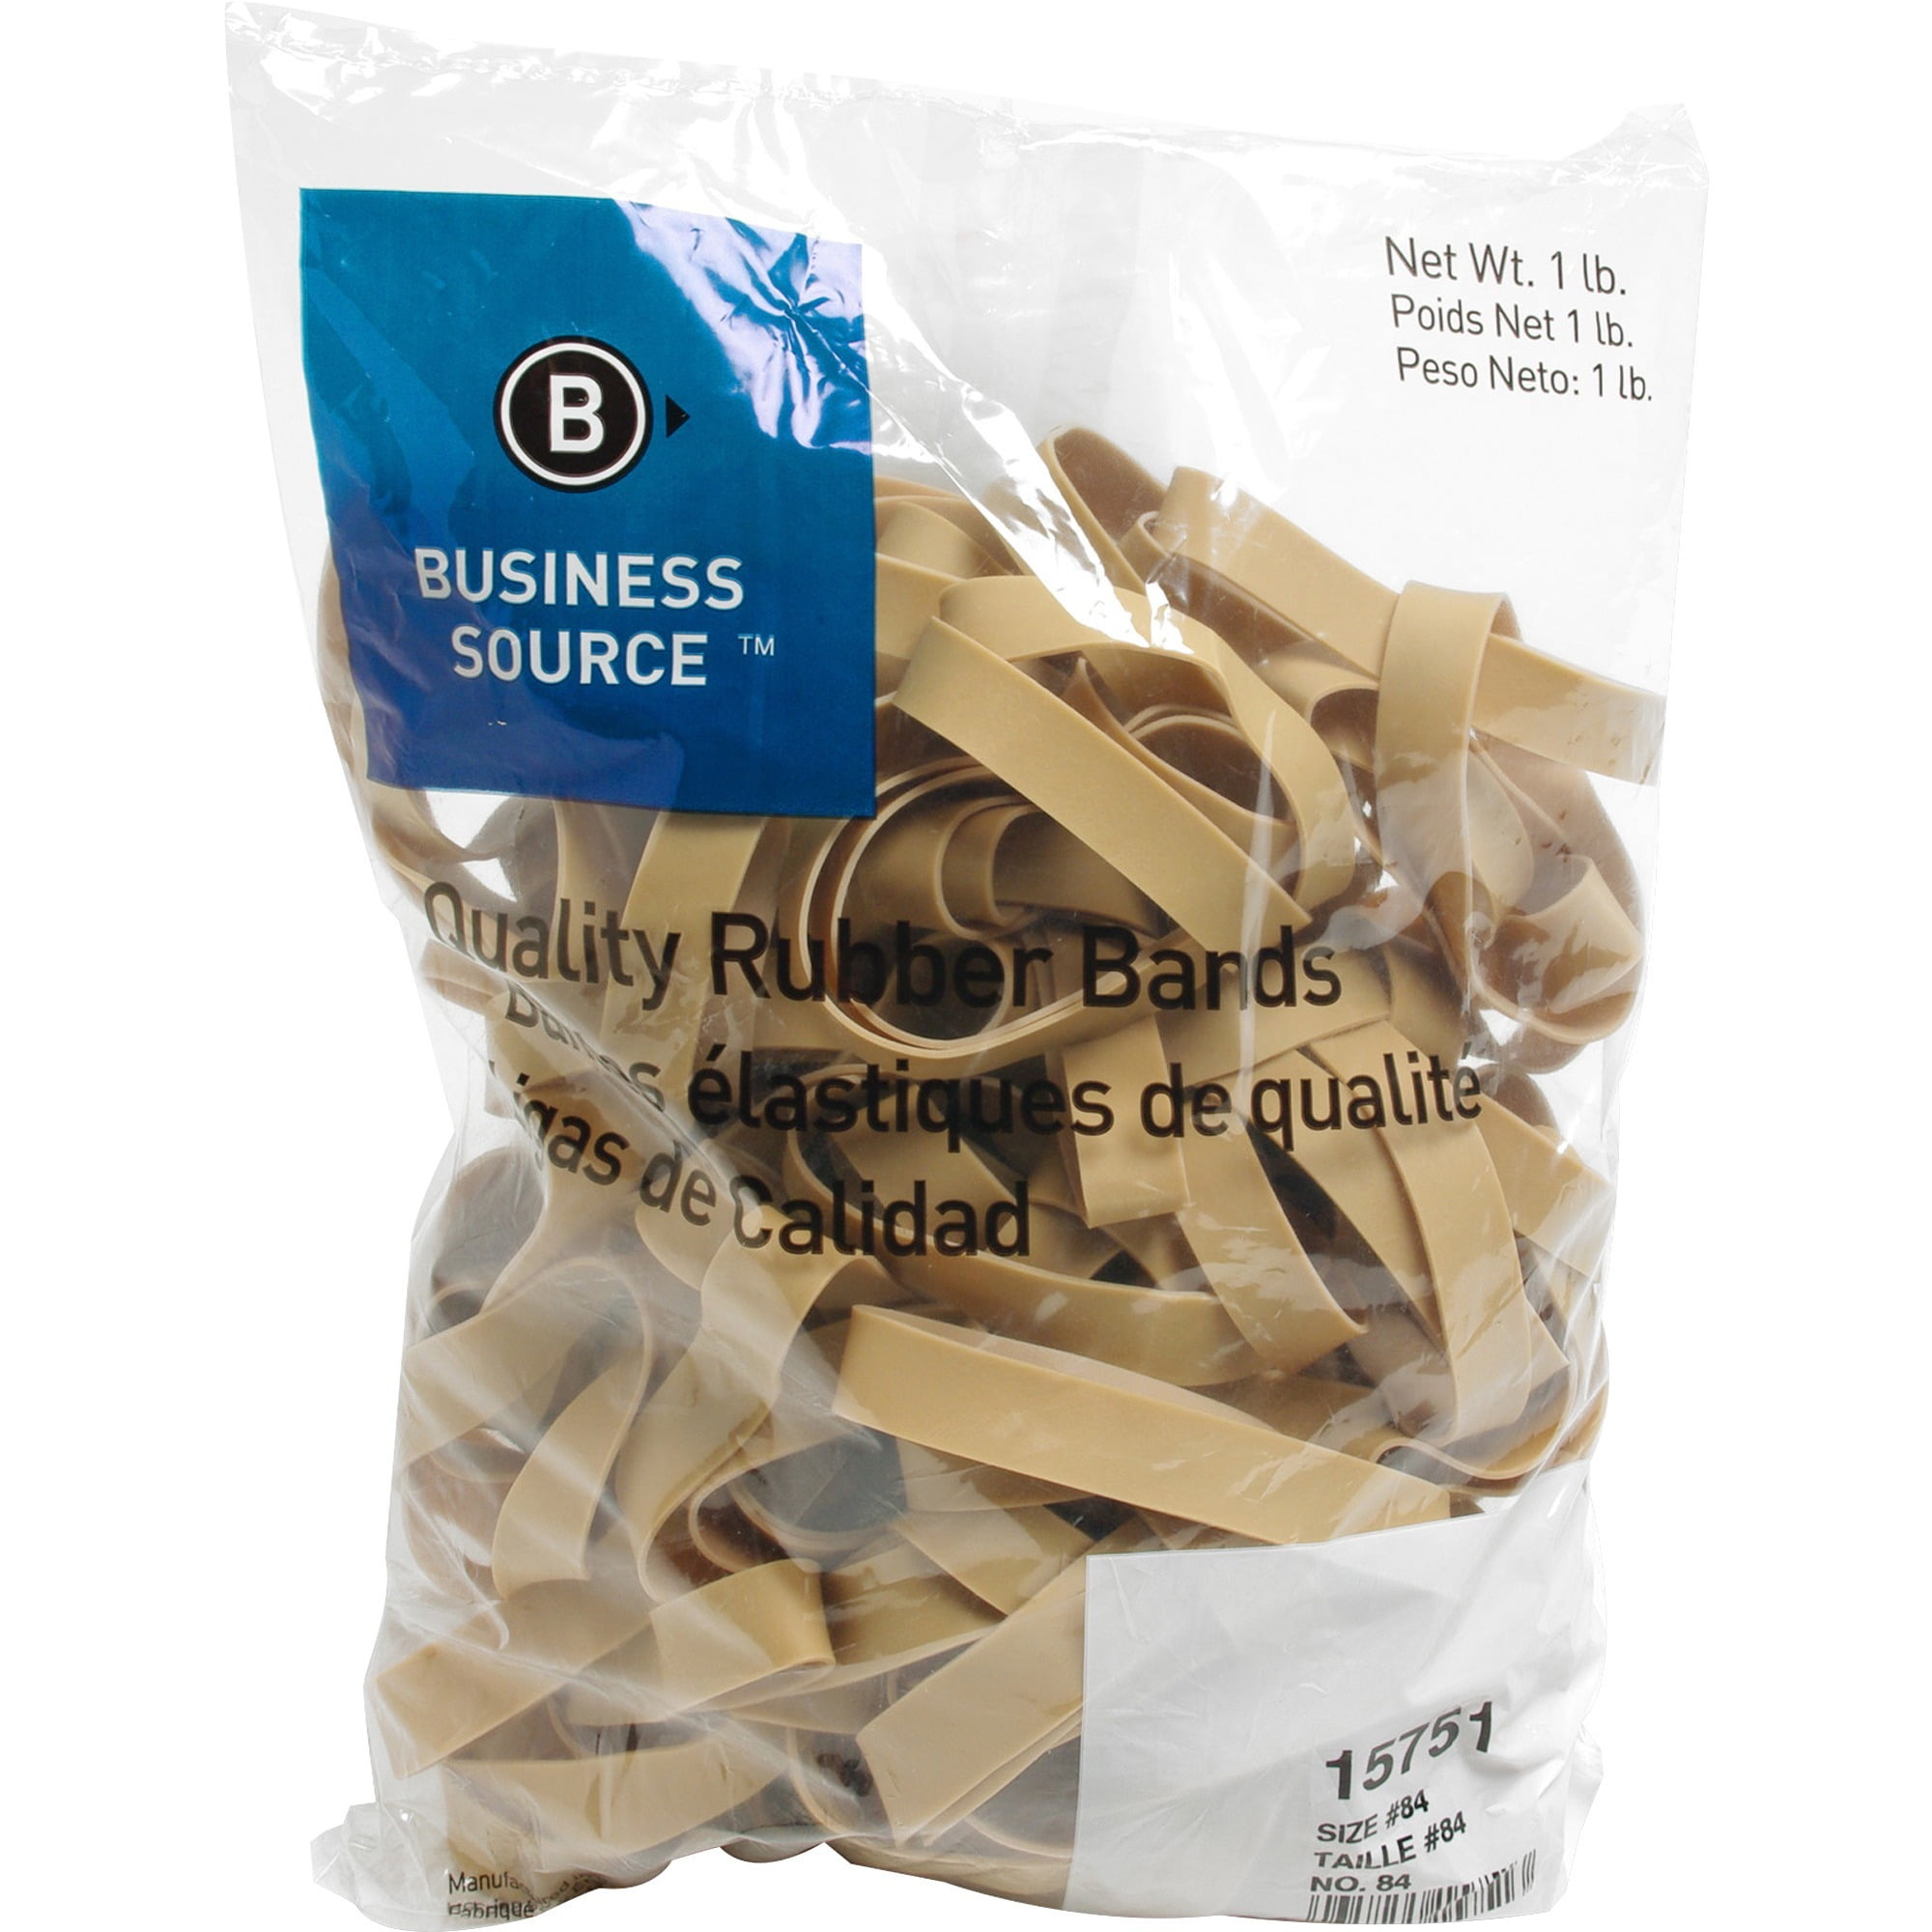 3 Packs Size 62 Business Source Quality Rubber Bands BSN 15746 